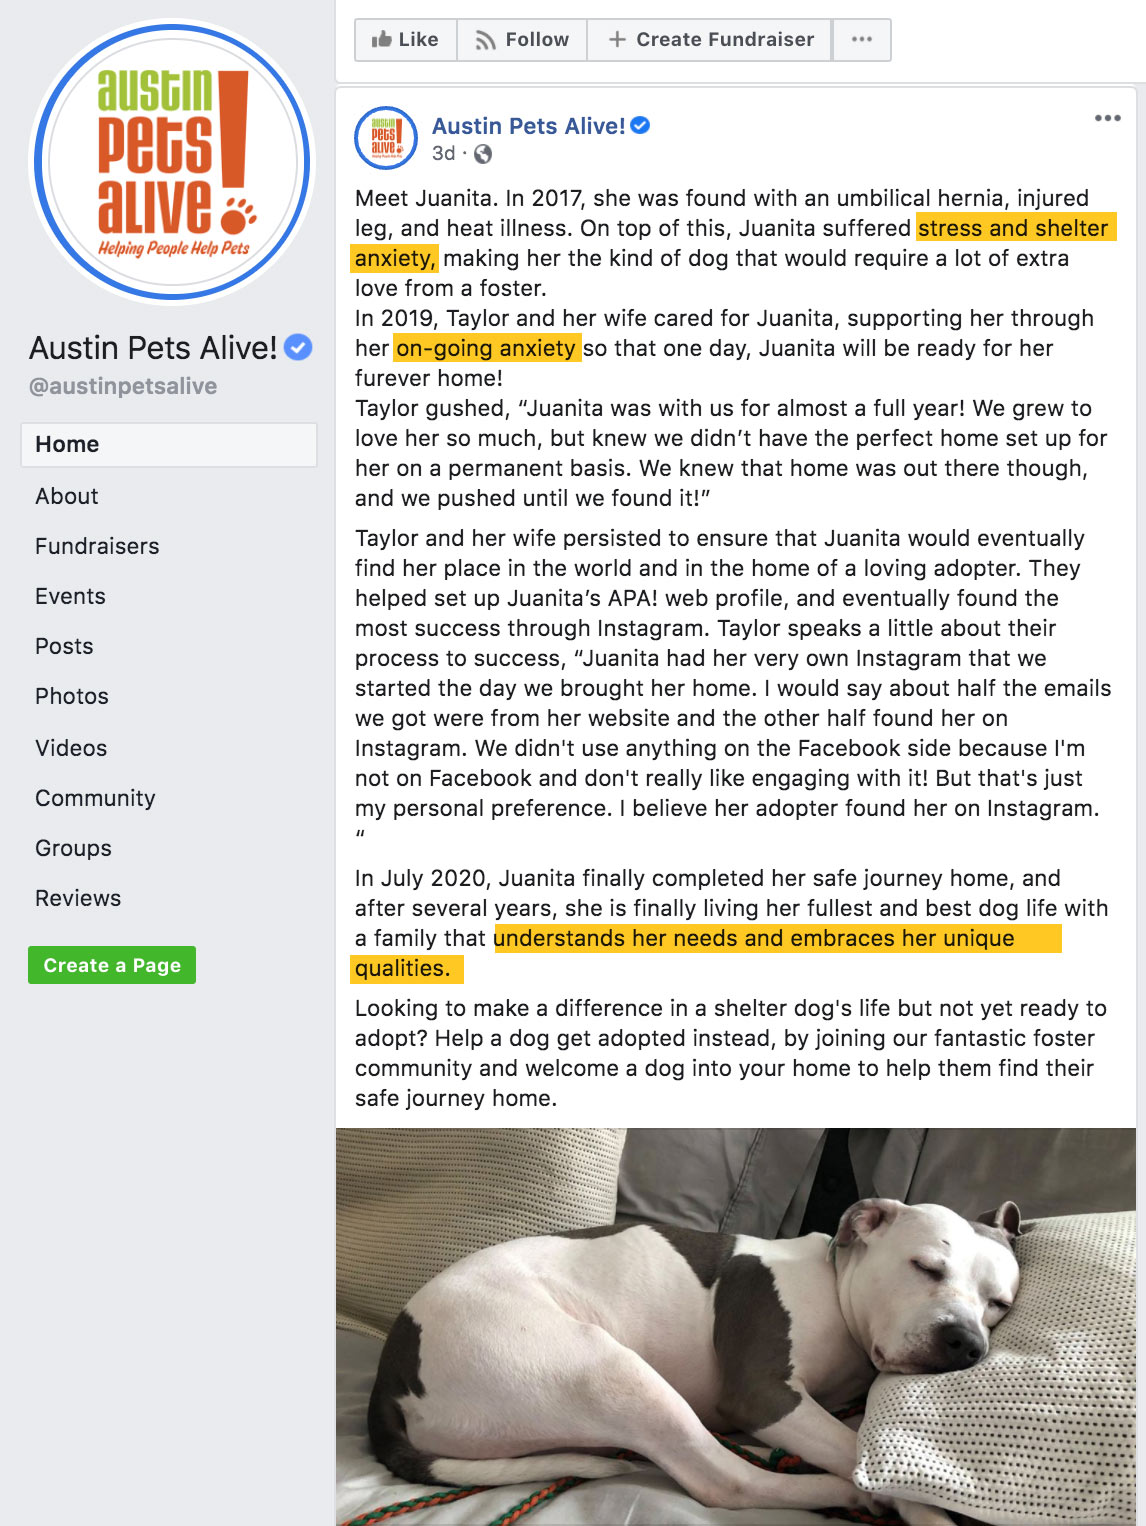 2020 Edition 125 Behavior Terms For Shelter Dogs Decoded That Mask Aggression In Dogs Available For Adoption Dogsbite Blog